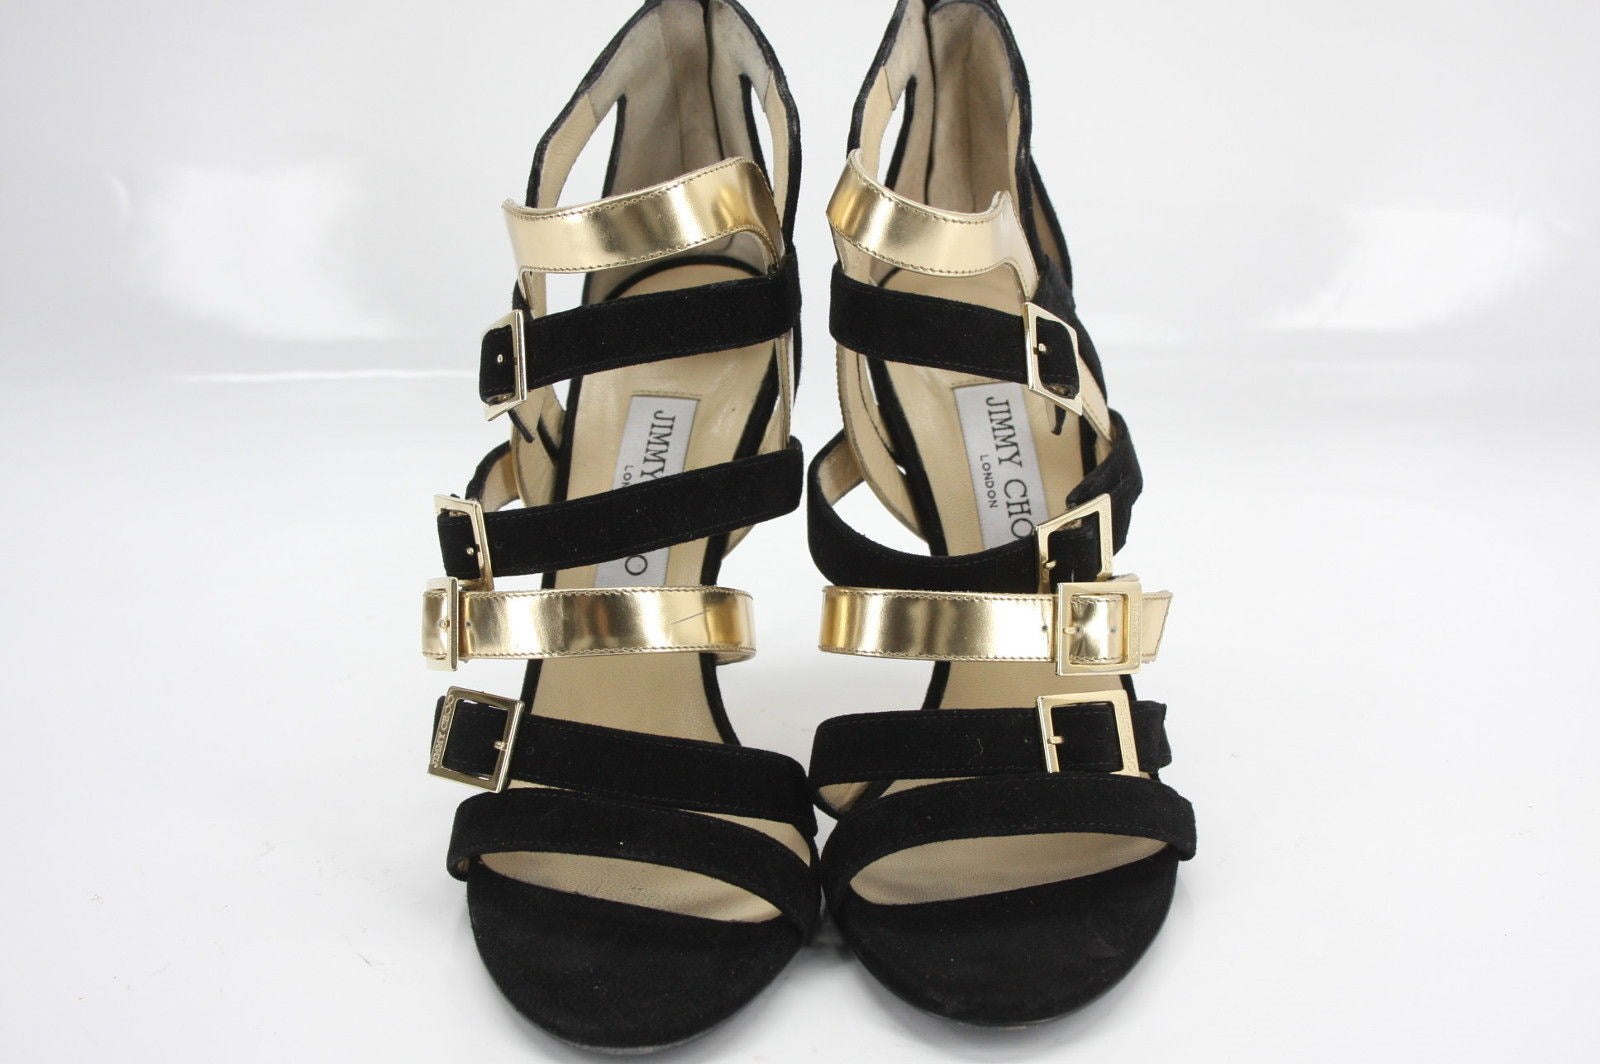 Jimmy Choo Bubble Bronx Leather Caged Strappy Sandals Size 39.5 New $925 Heels